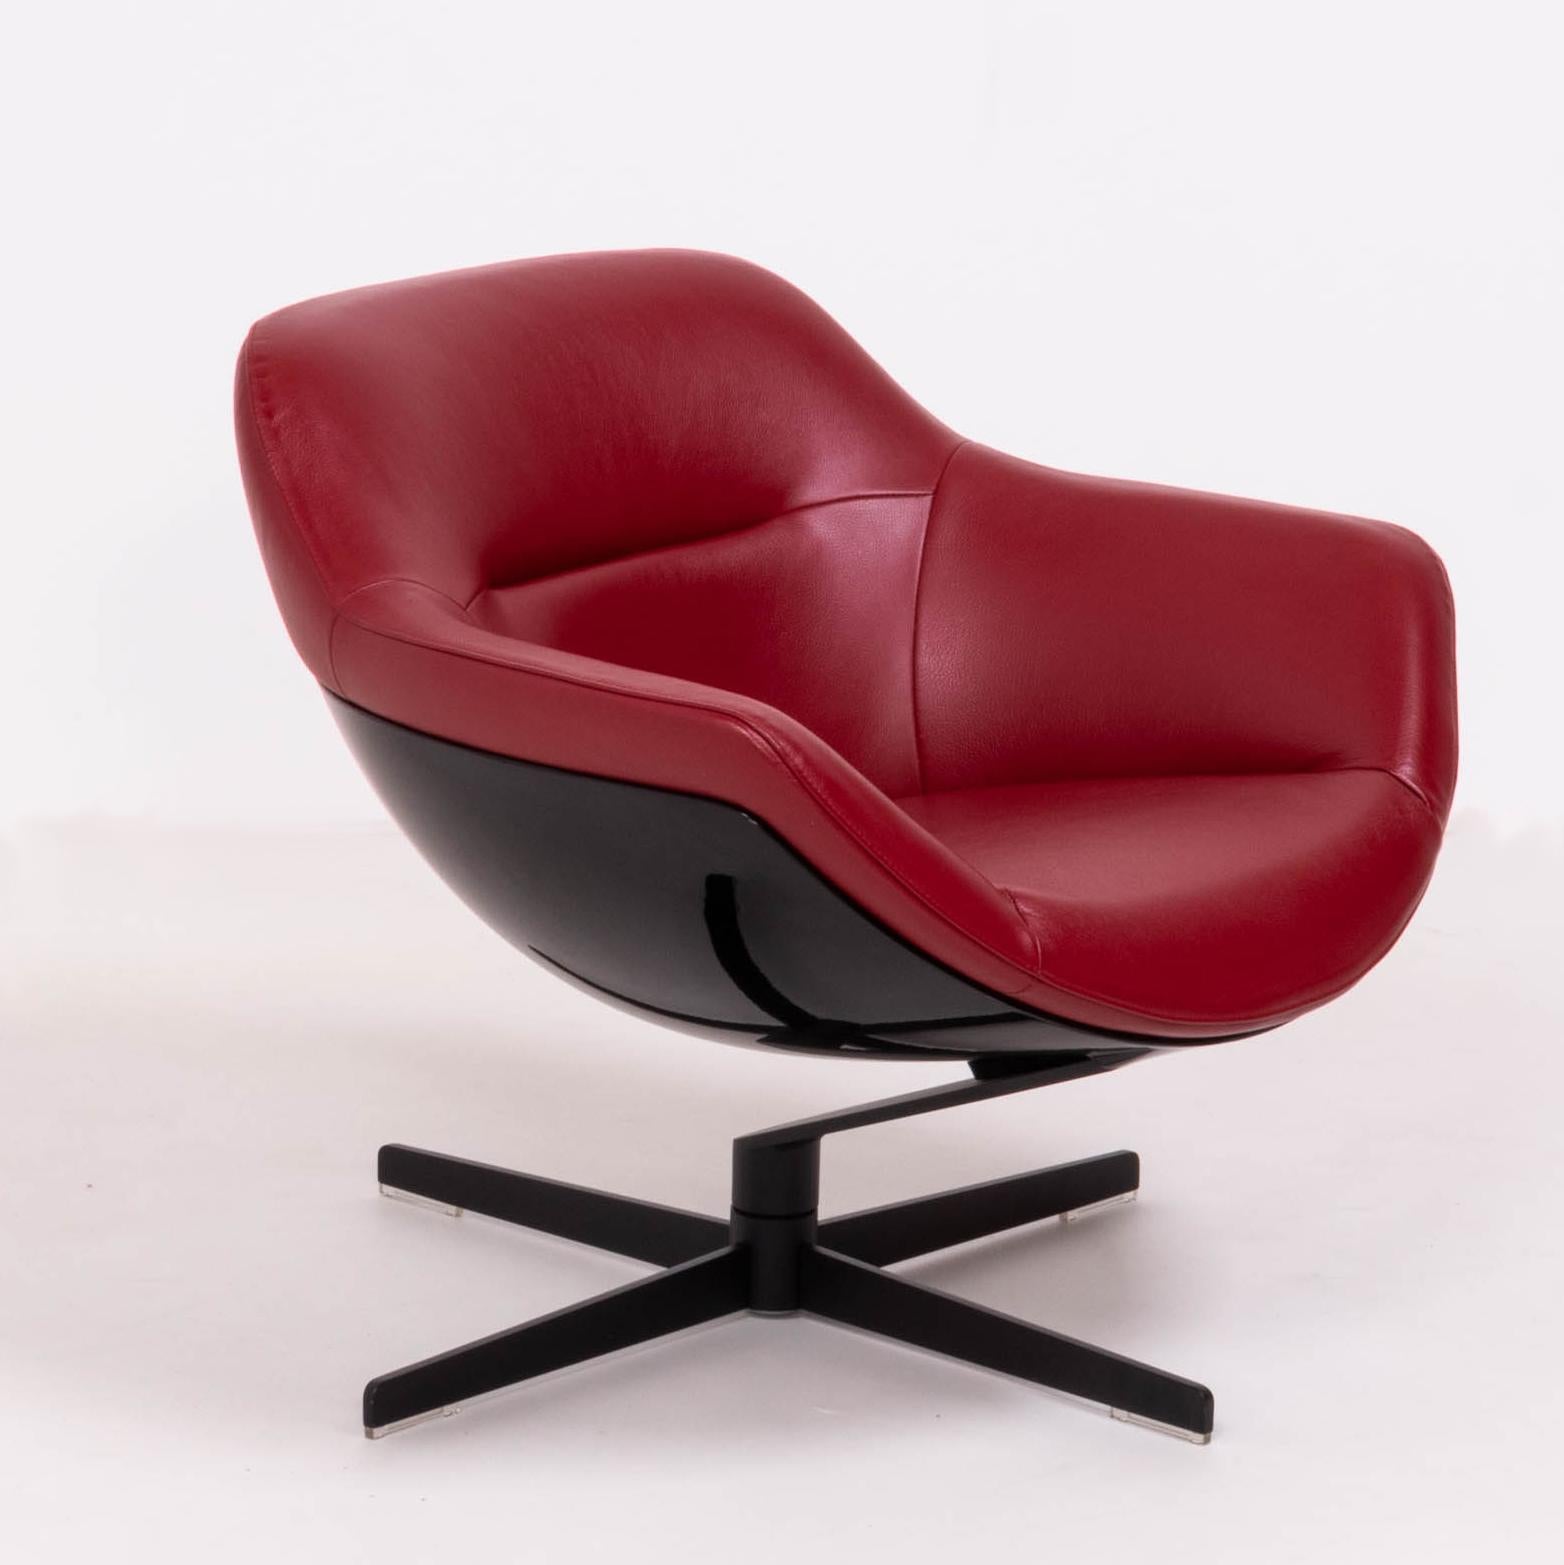 Designed by Jean-Marie Massaud for Cassina in 2005, the 277 Auckland chair is a modern reinterpretation of the timeless lounge chair.

The glossy black fibreglass shell-shaped structure, contrasts perfectly with the deep red leather upholstery and